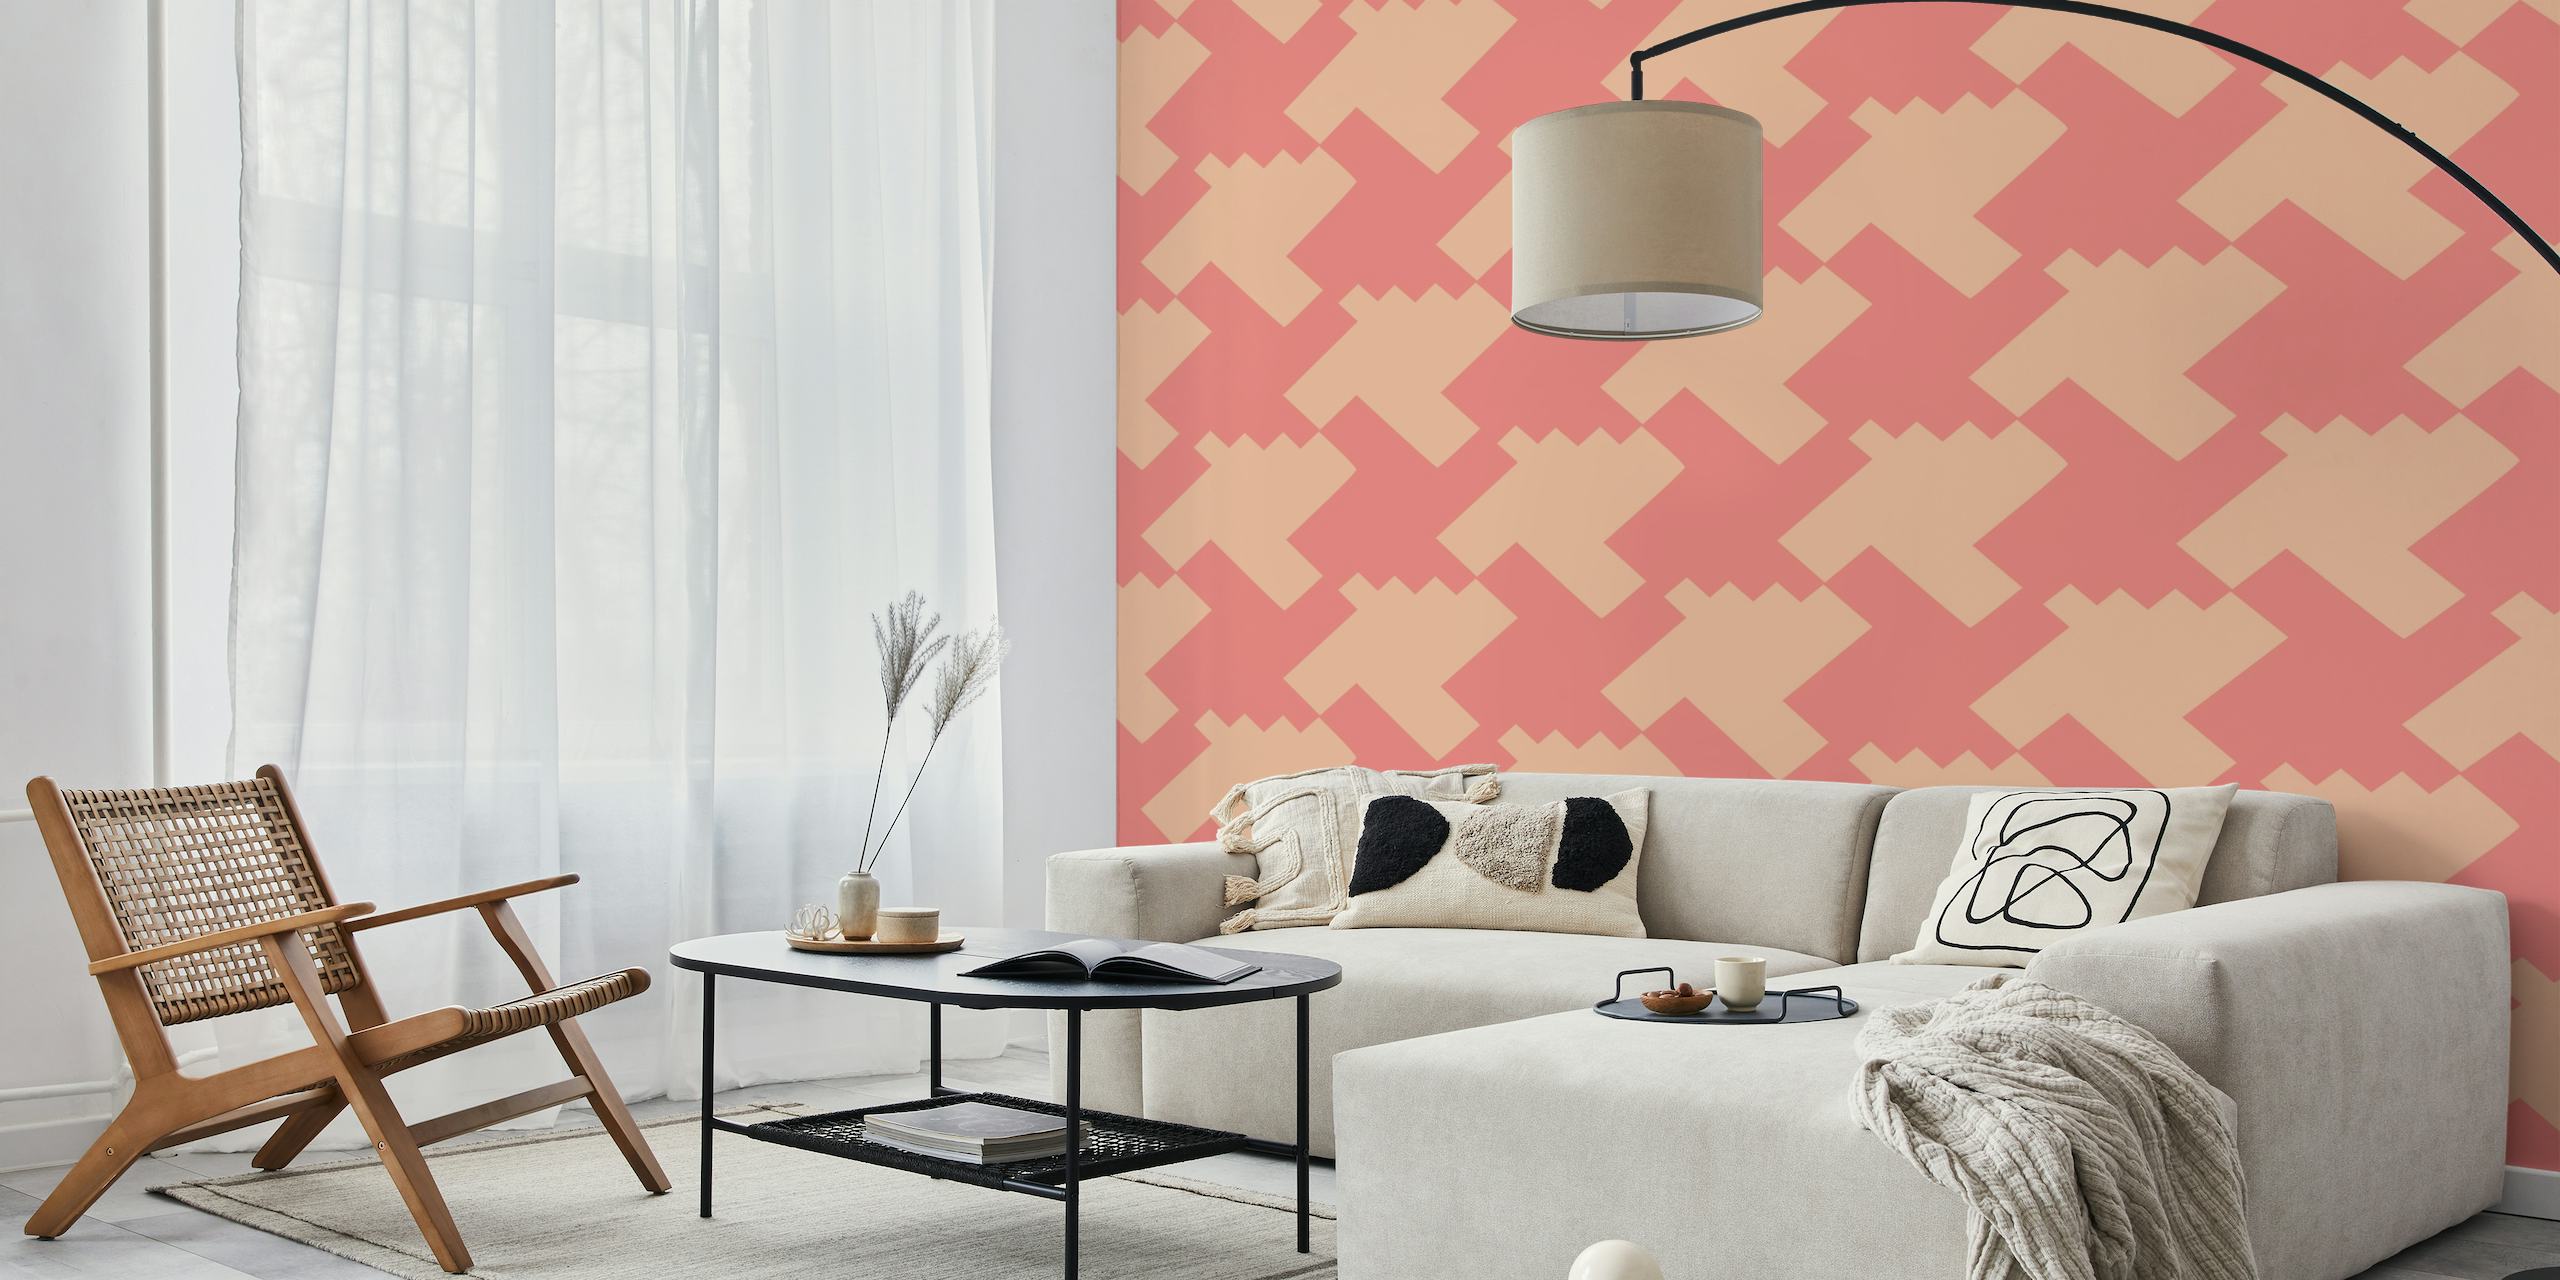 Aztec Abstract Peach Rose wall mural featuring geometric pattern in peach and rose colors